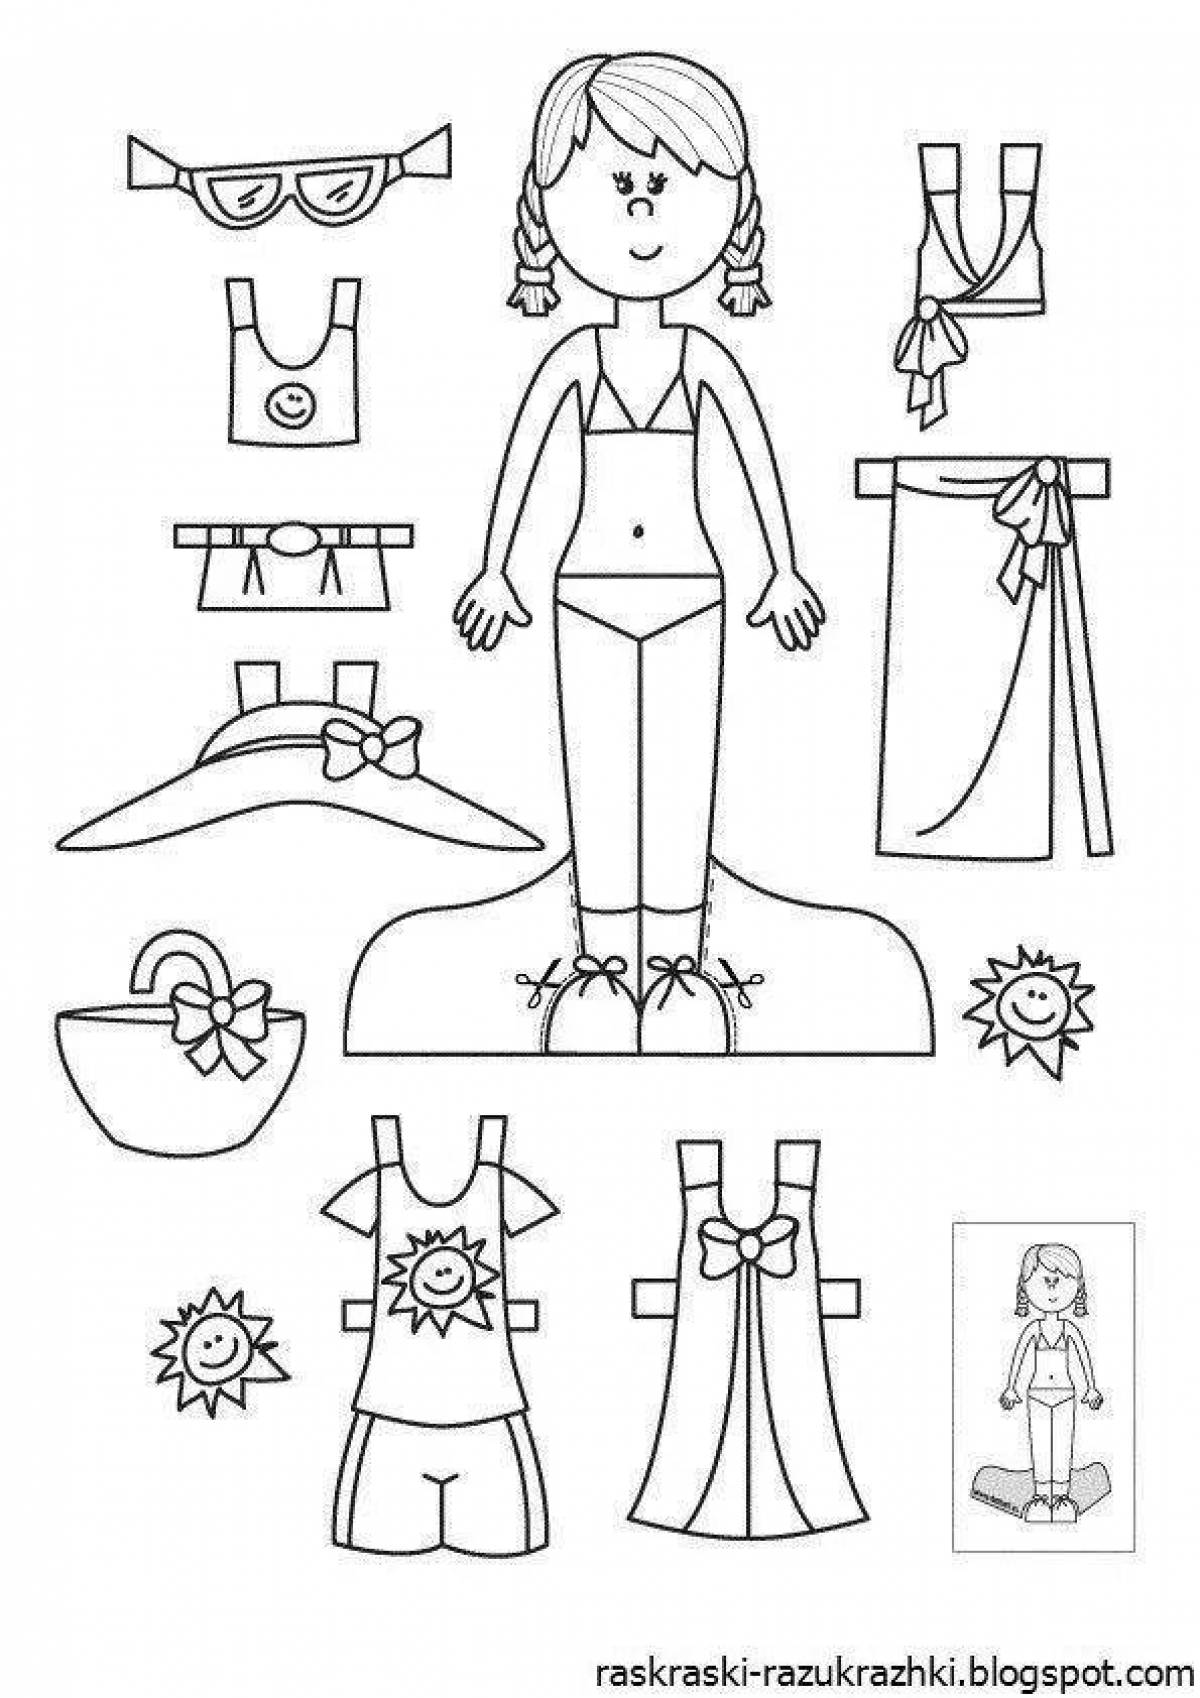 Colorful cut coloring page